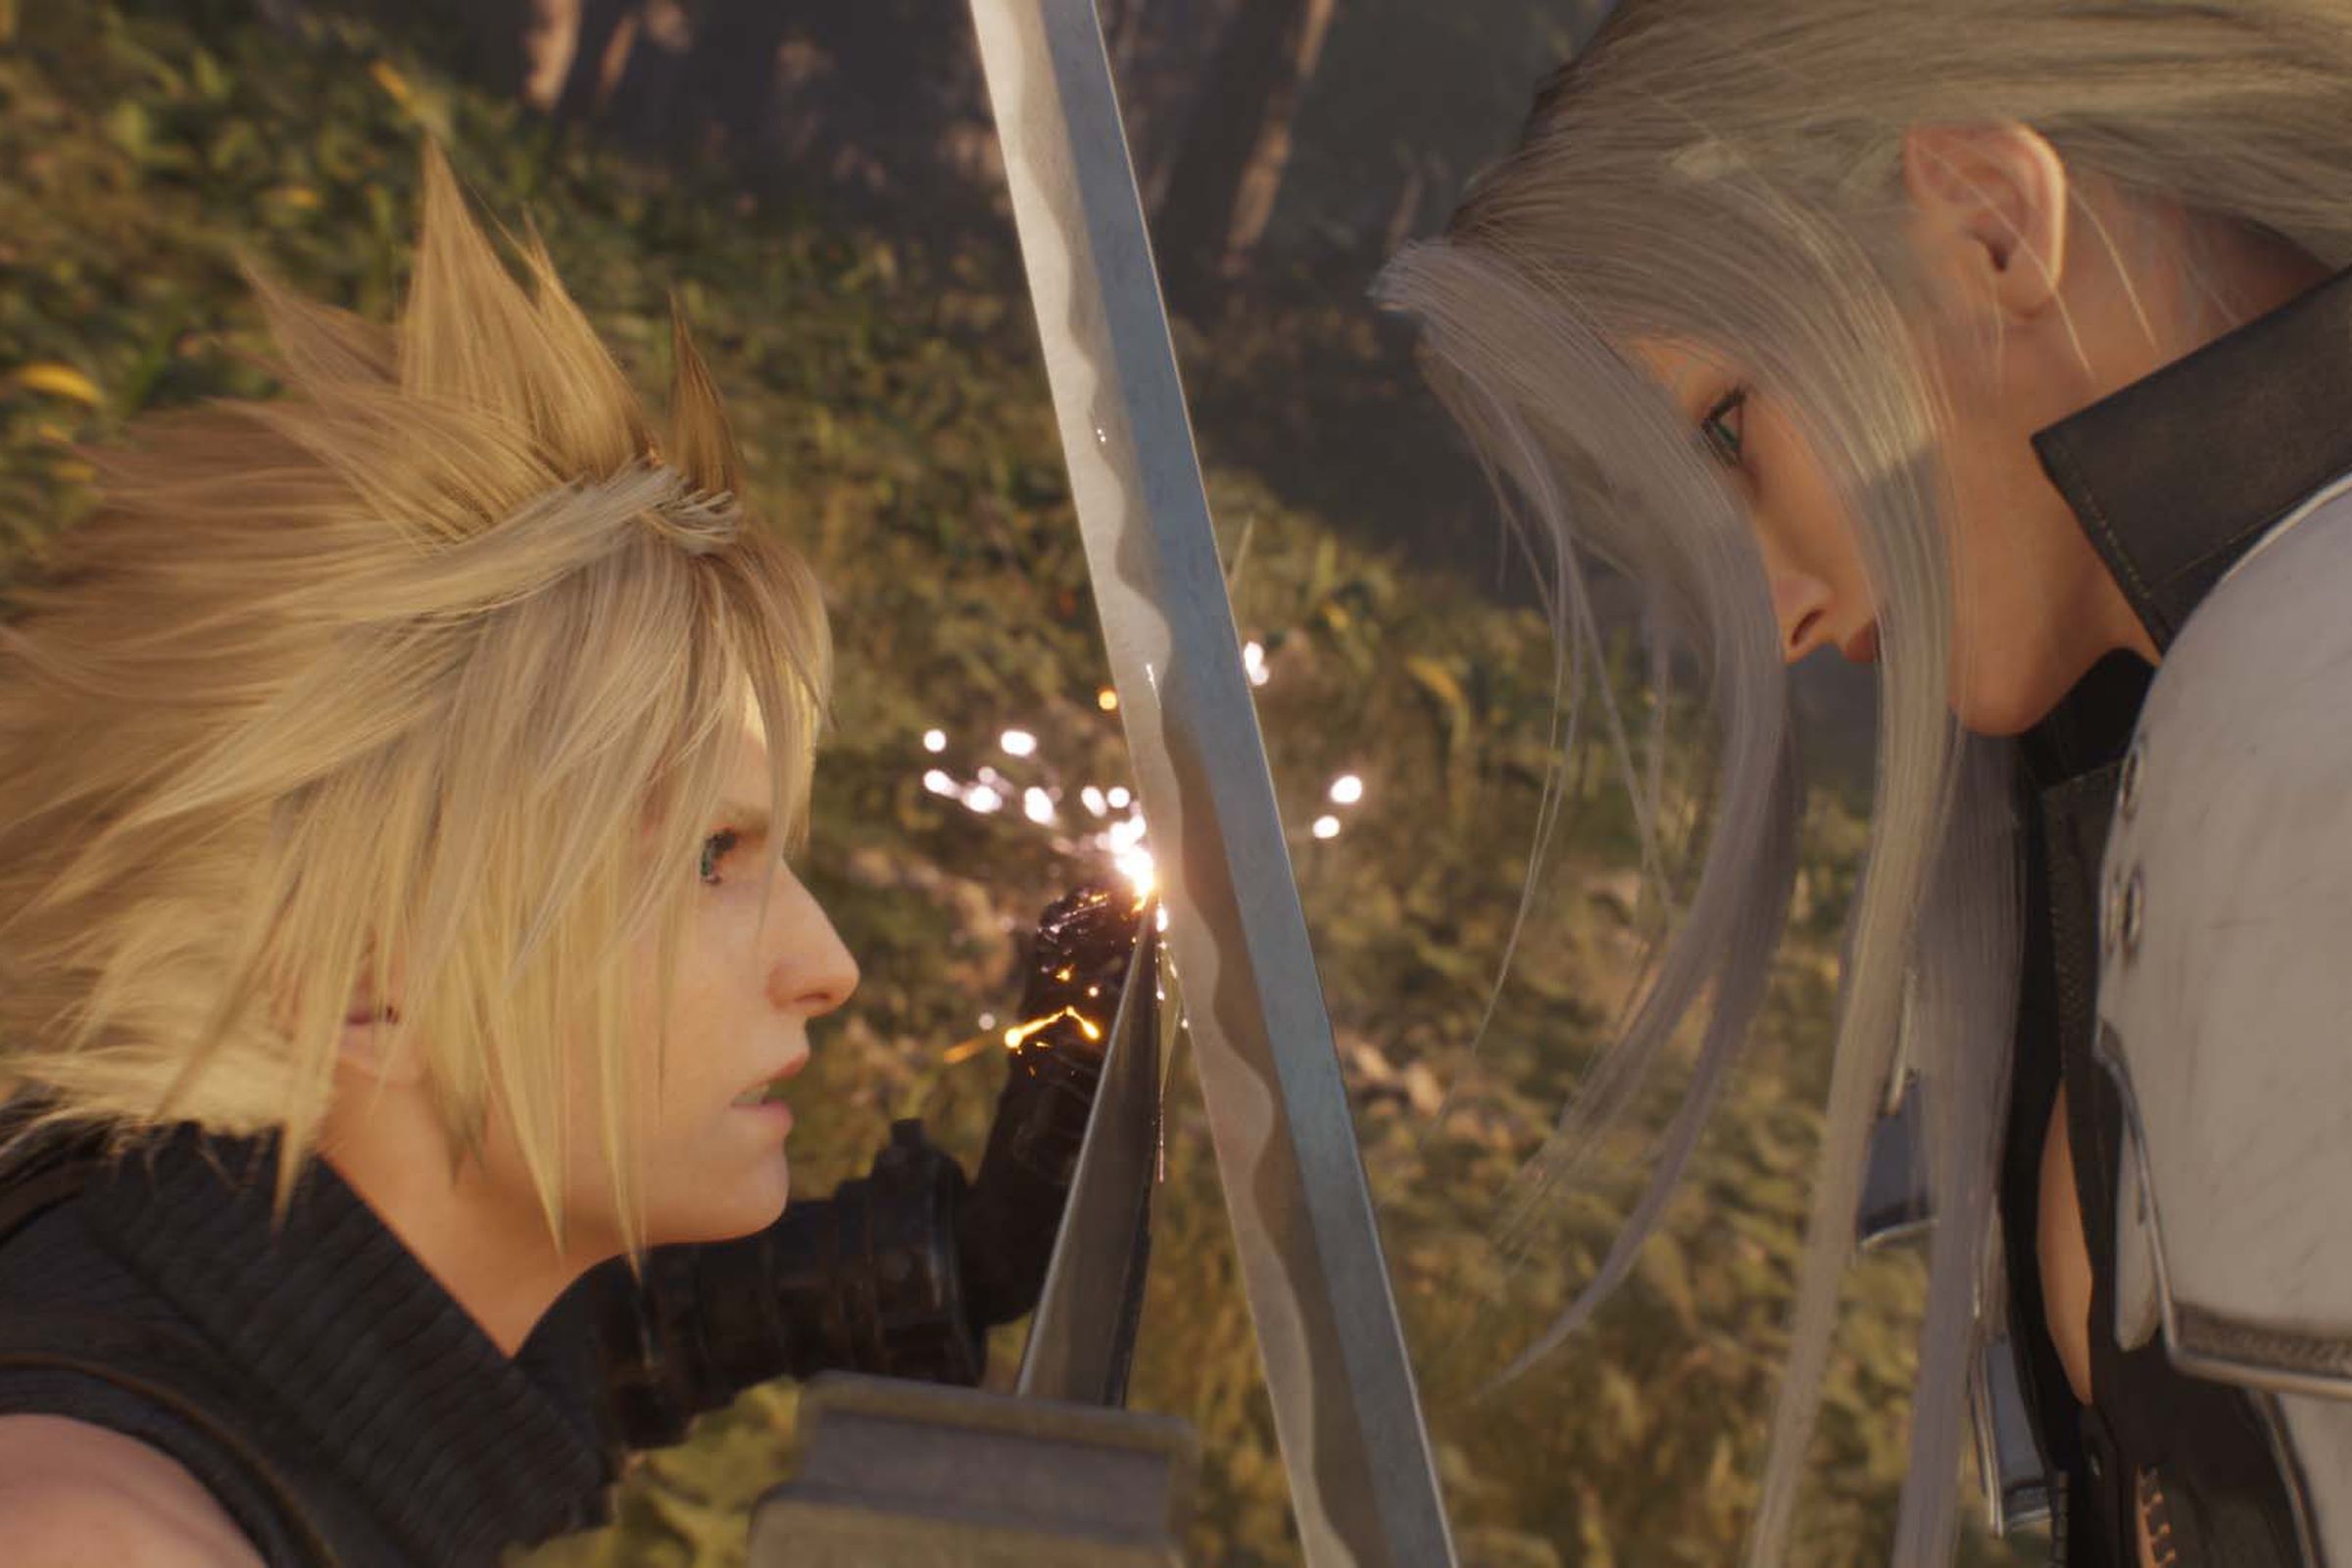 Screenshot from Final Fantasy VII Rebirth featuring a close up of Cloud (left) and Sephiroth (right) clashing swords.